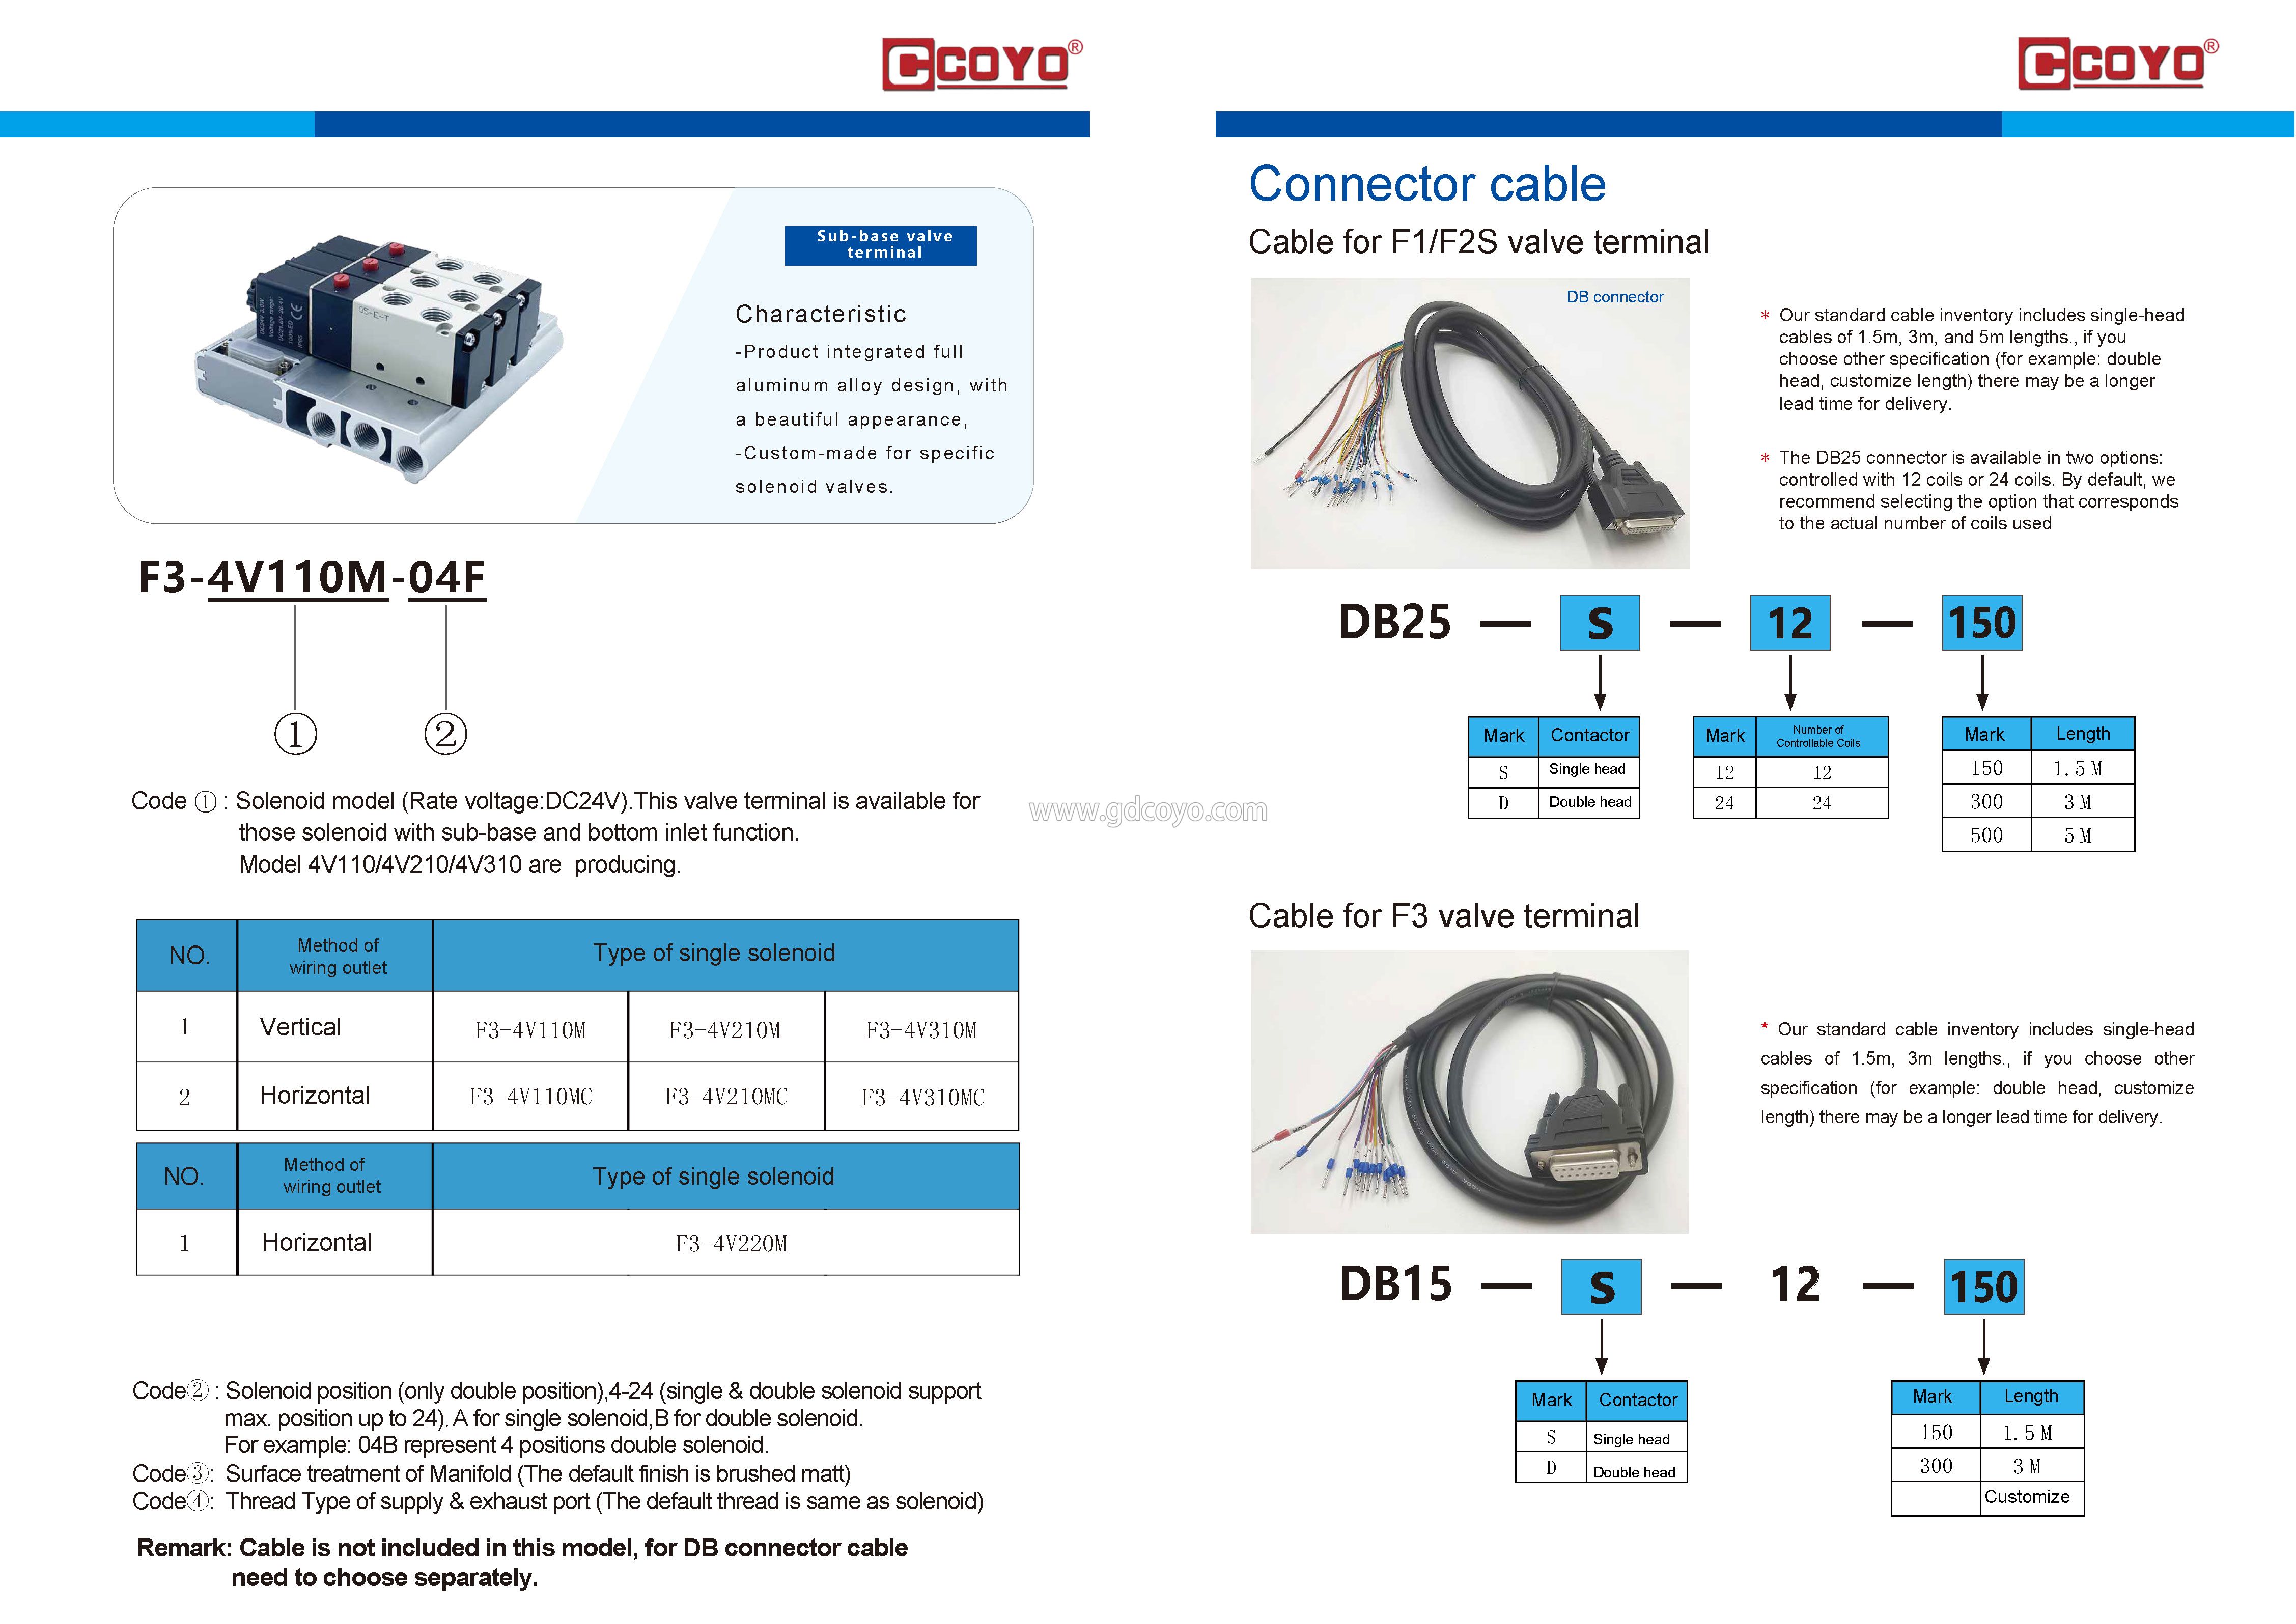 DB15 Connector Cables For F3 Valve Terminal